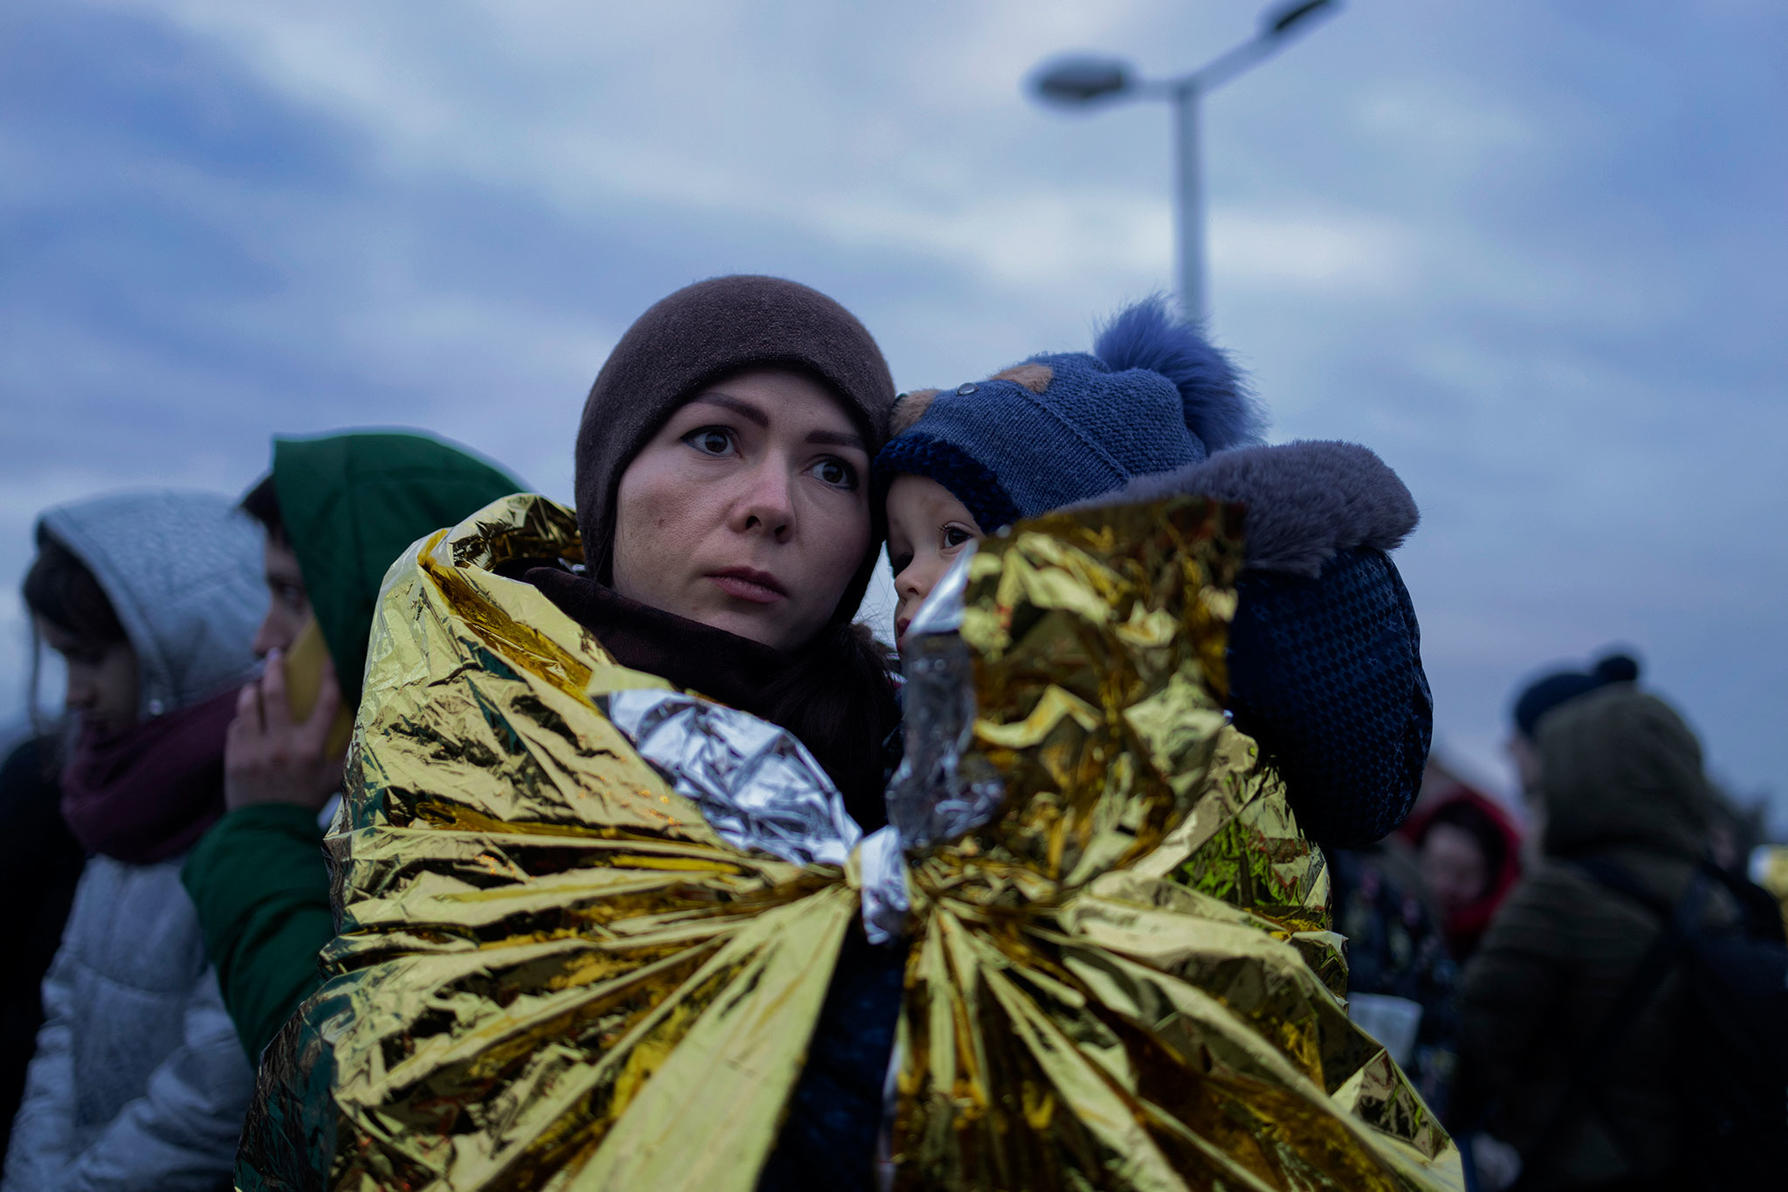 Refugees from Ukraine wait for a bus to continue their journey after crossing the Polish border at Medyk, Poland.